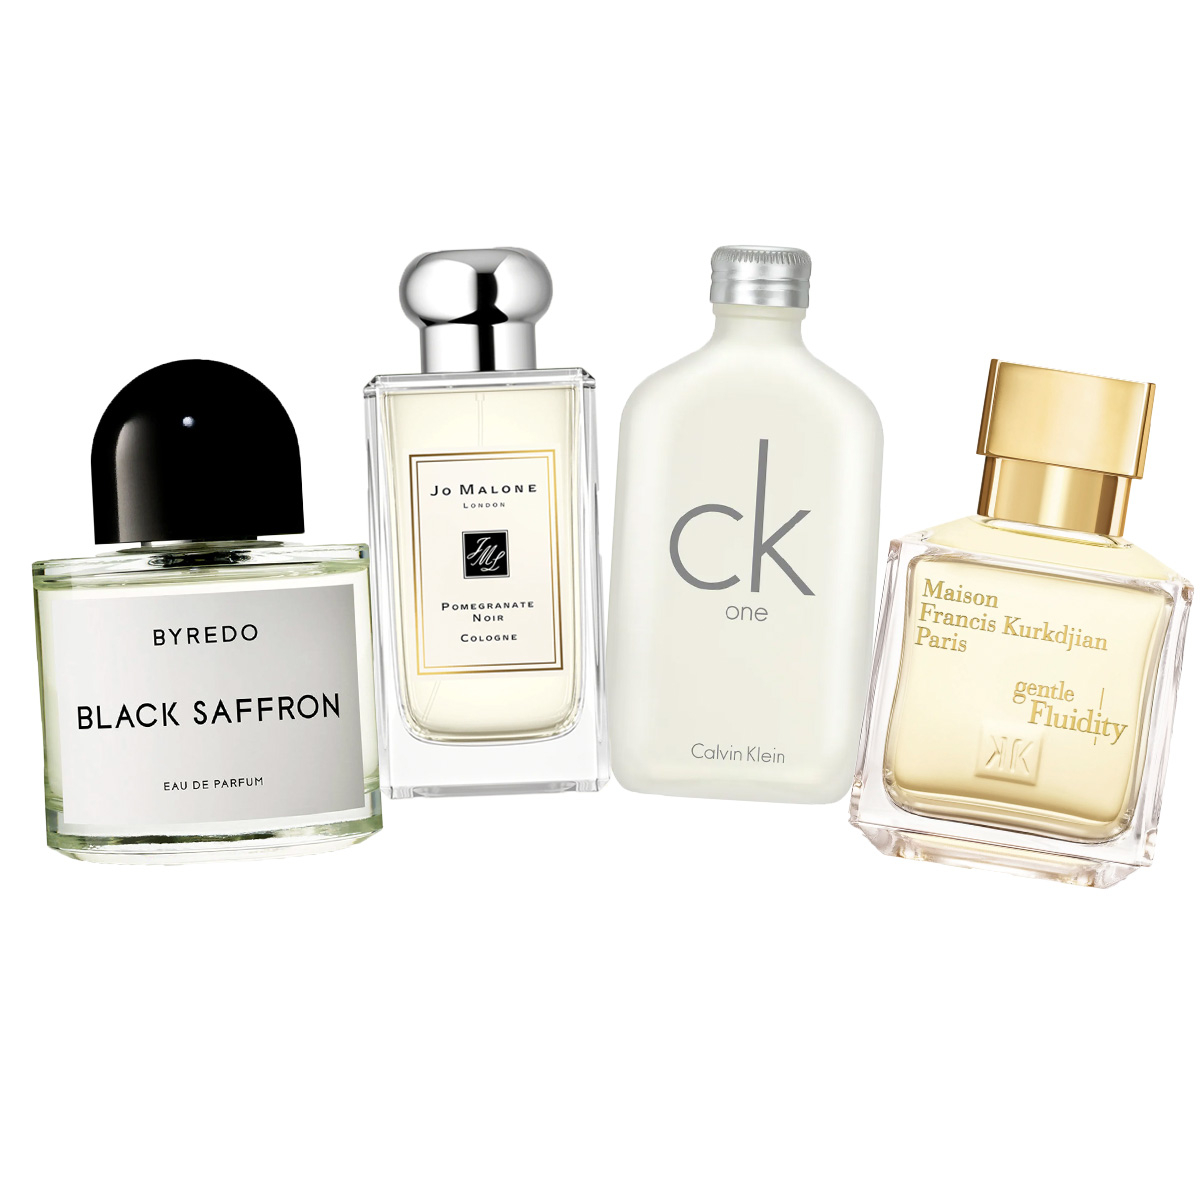 Calvin Klein Perfumes and Colognes online in Canada at best prices – Page 4  –